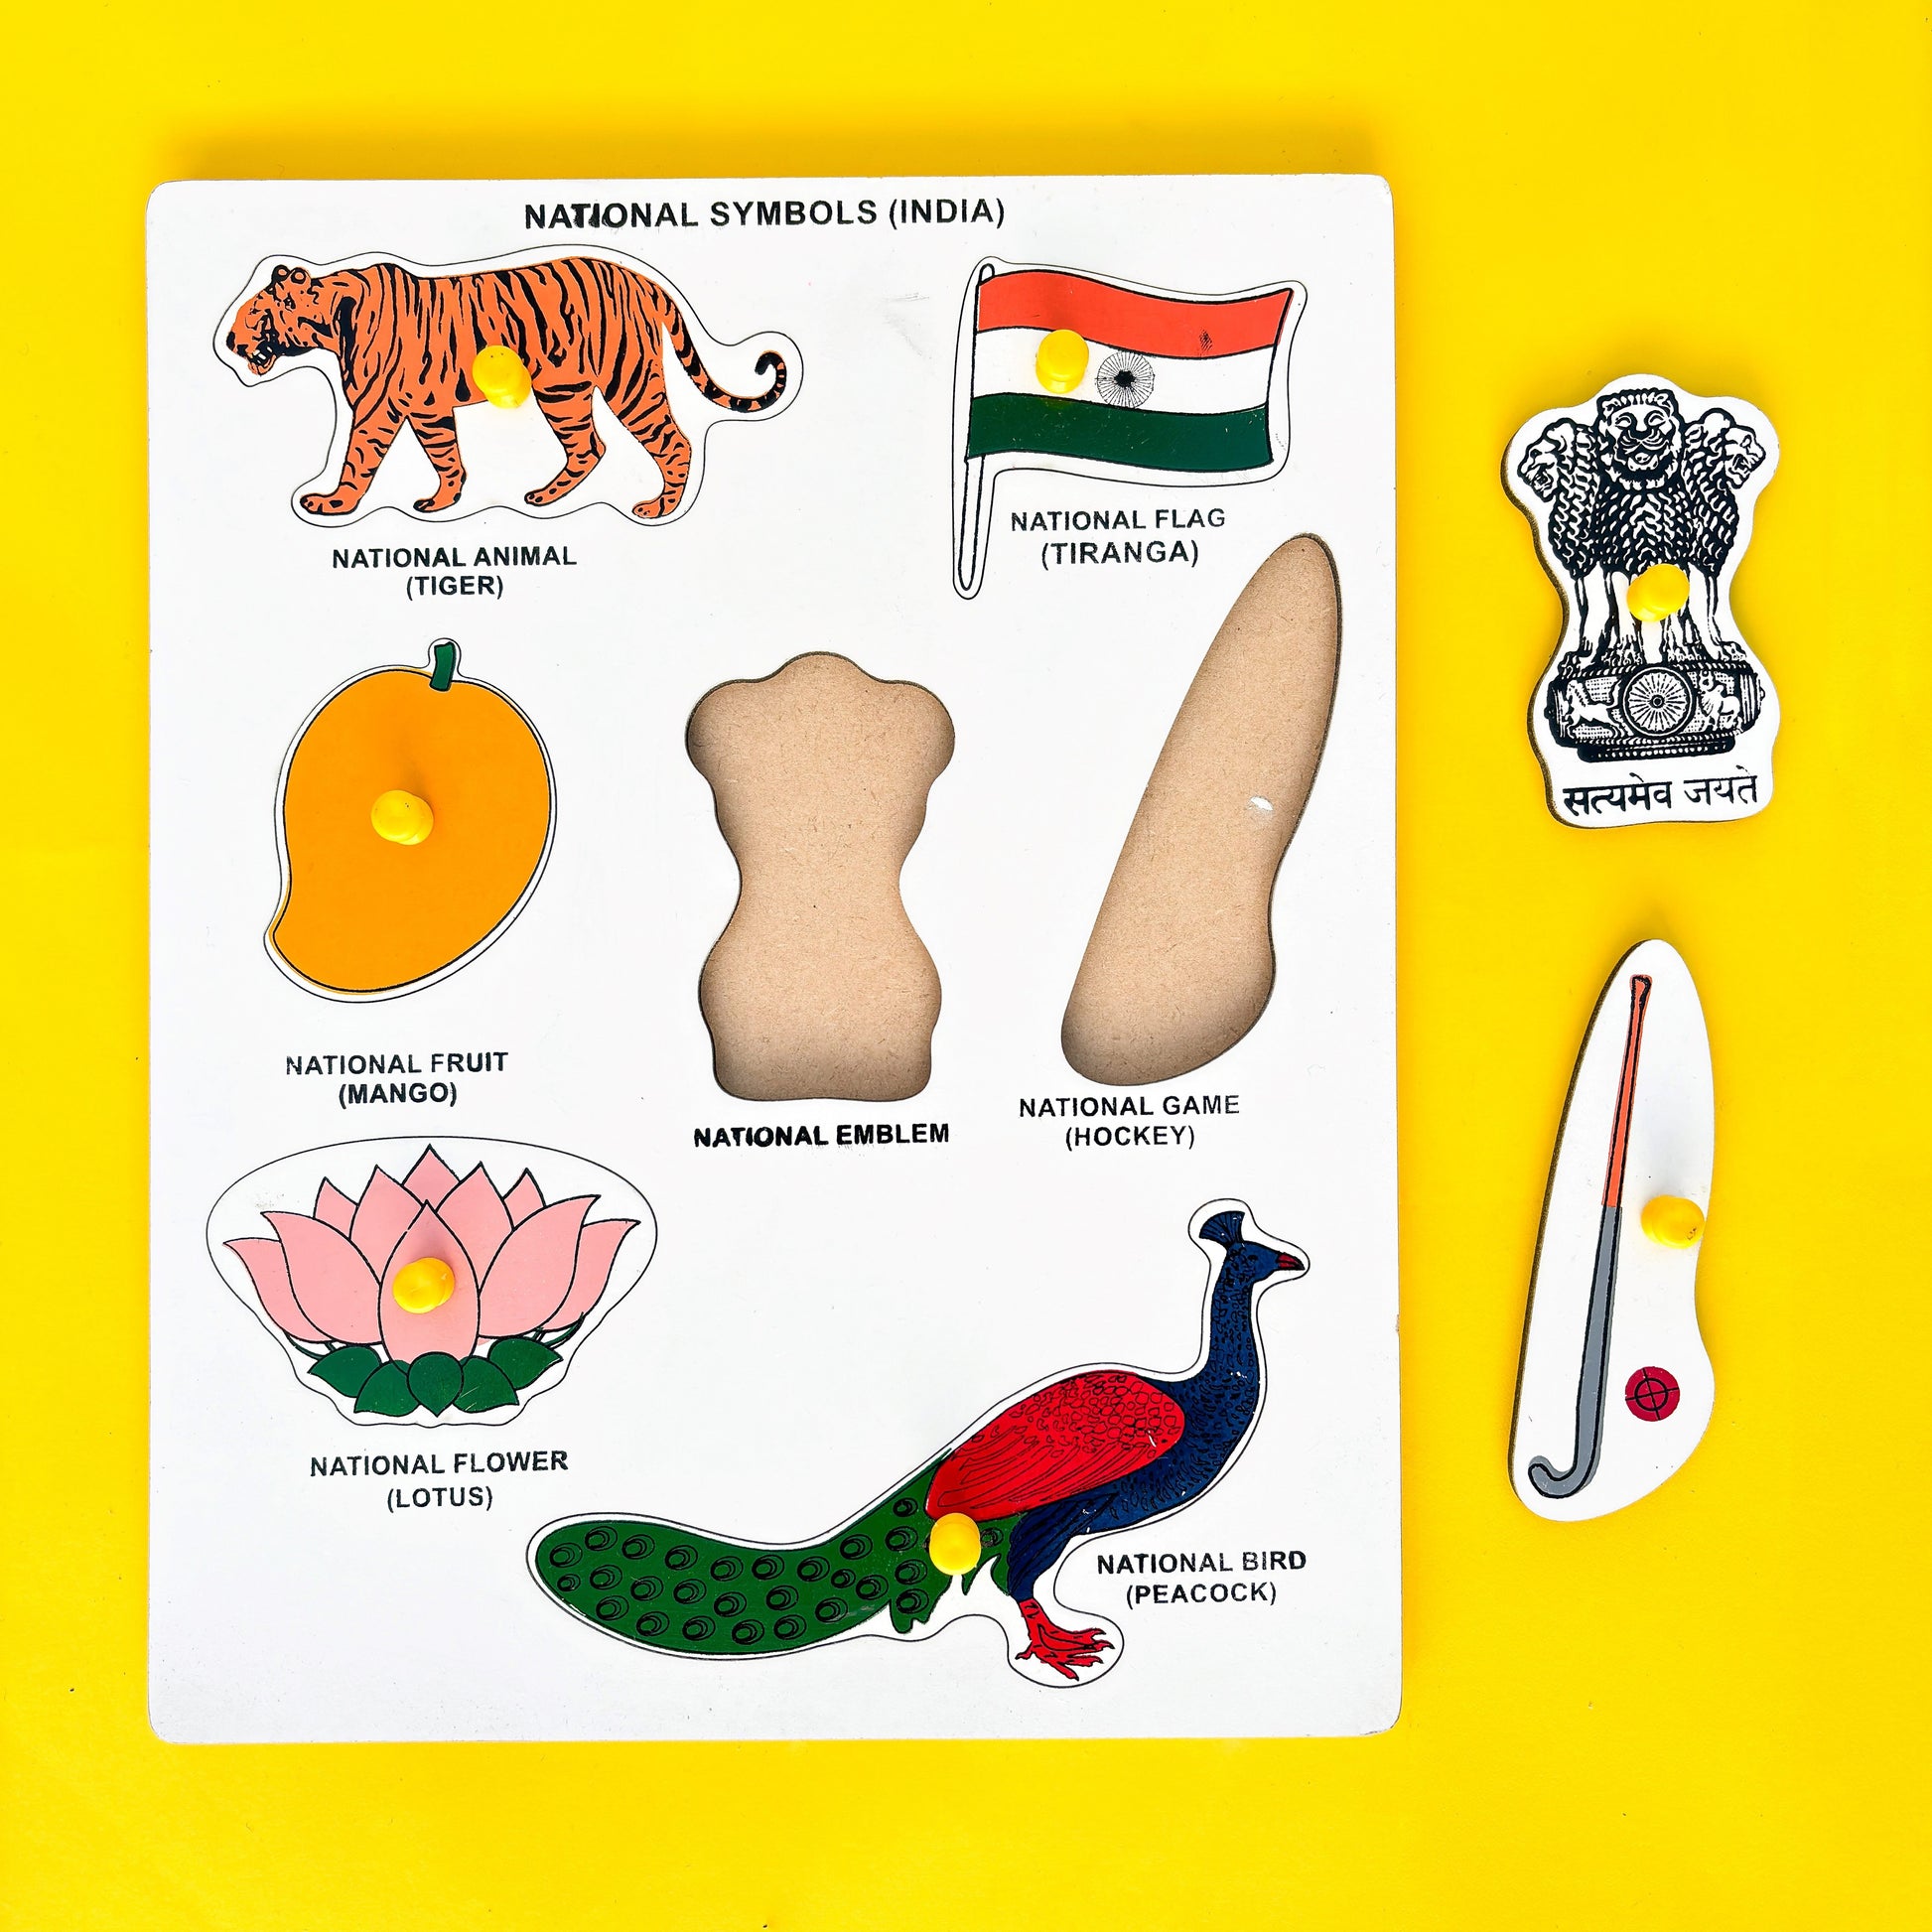 A colorful wooden puzzle map of India shaped like the country, depicting its national symbols. The puzzle includes the Indian national flag (Tiranga), a Bengal tiger (national animal), a mango (national fruit), a hockey stick and ball (national game), a lotus flower (national flower), a peacock (national bird), and the national emblem of India (Satyameva Jayate).